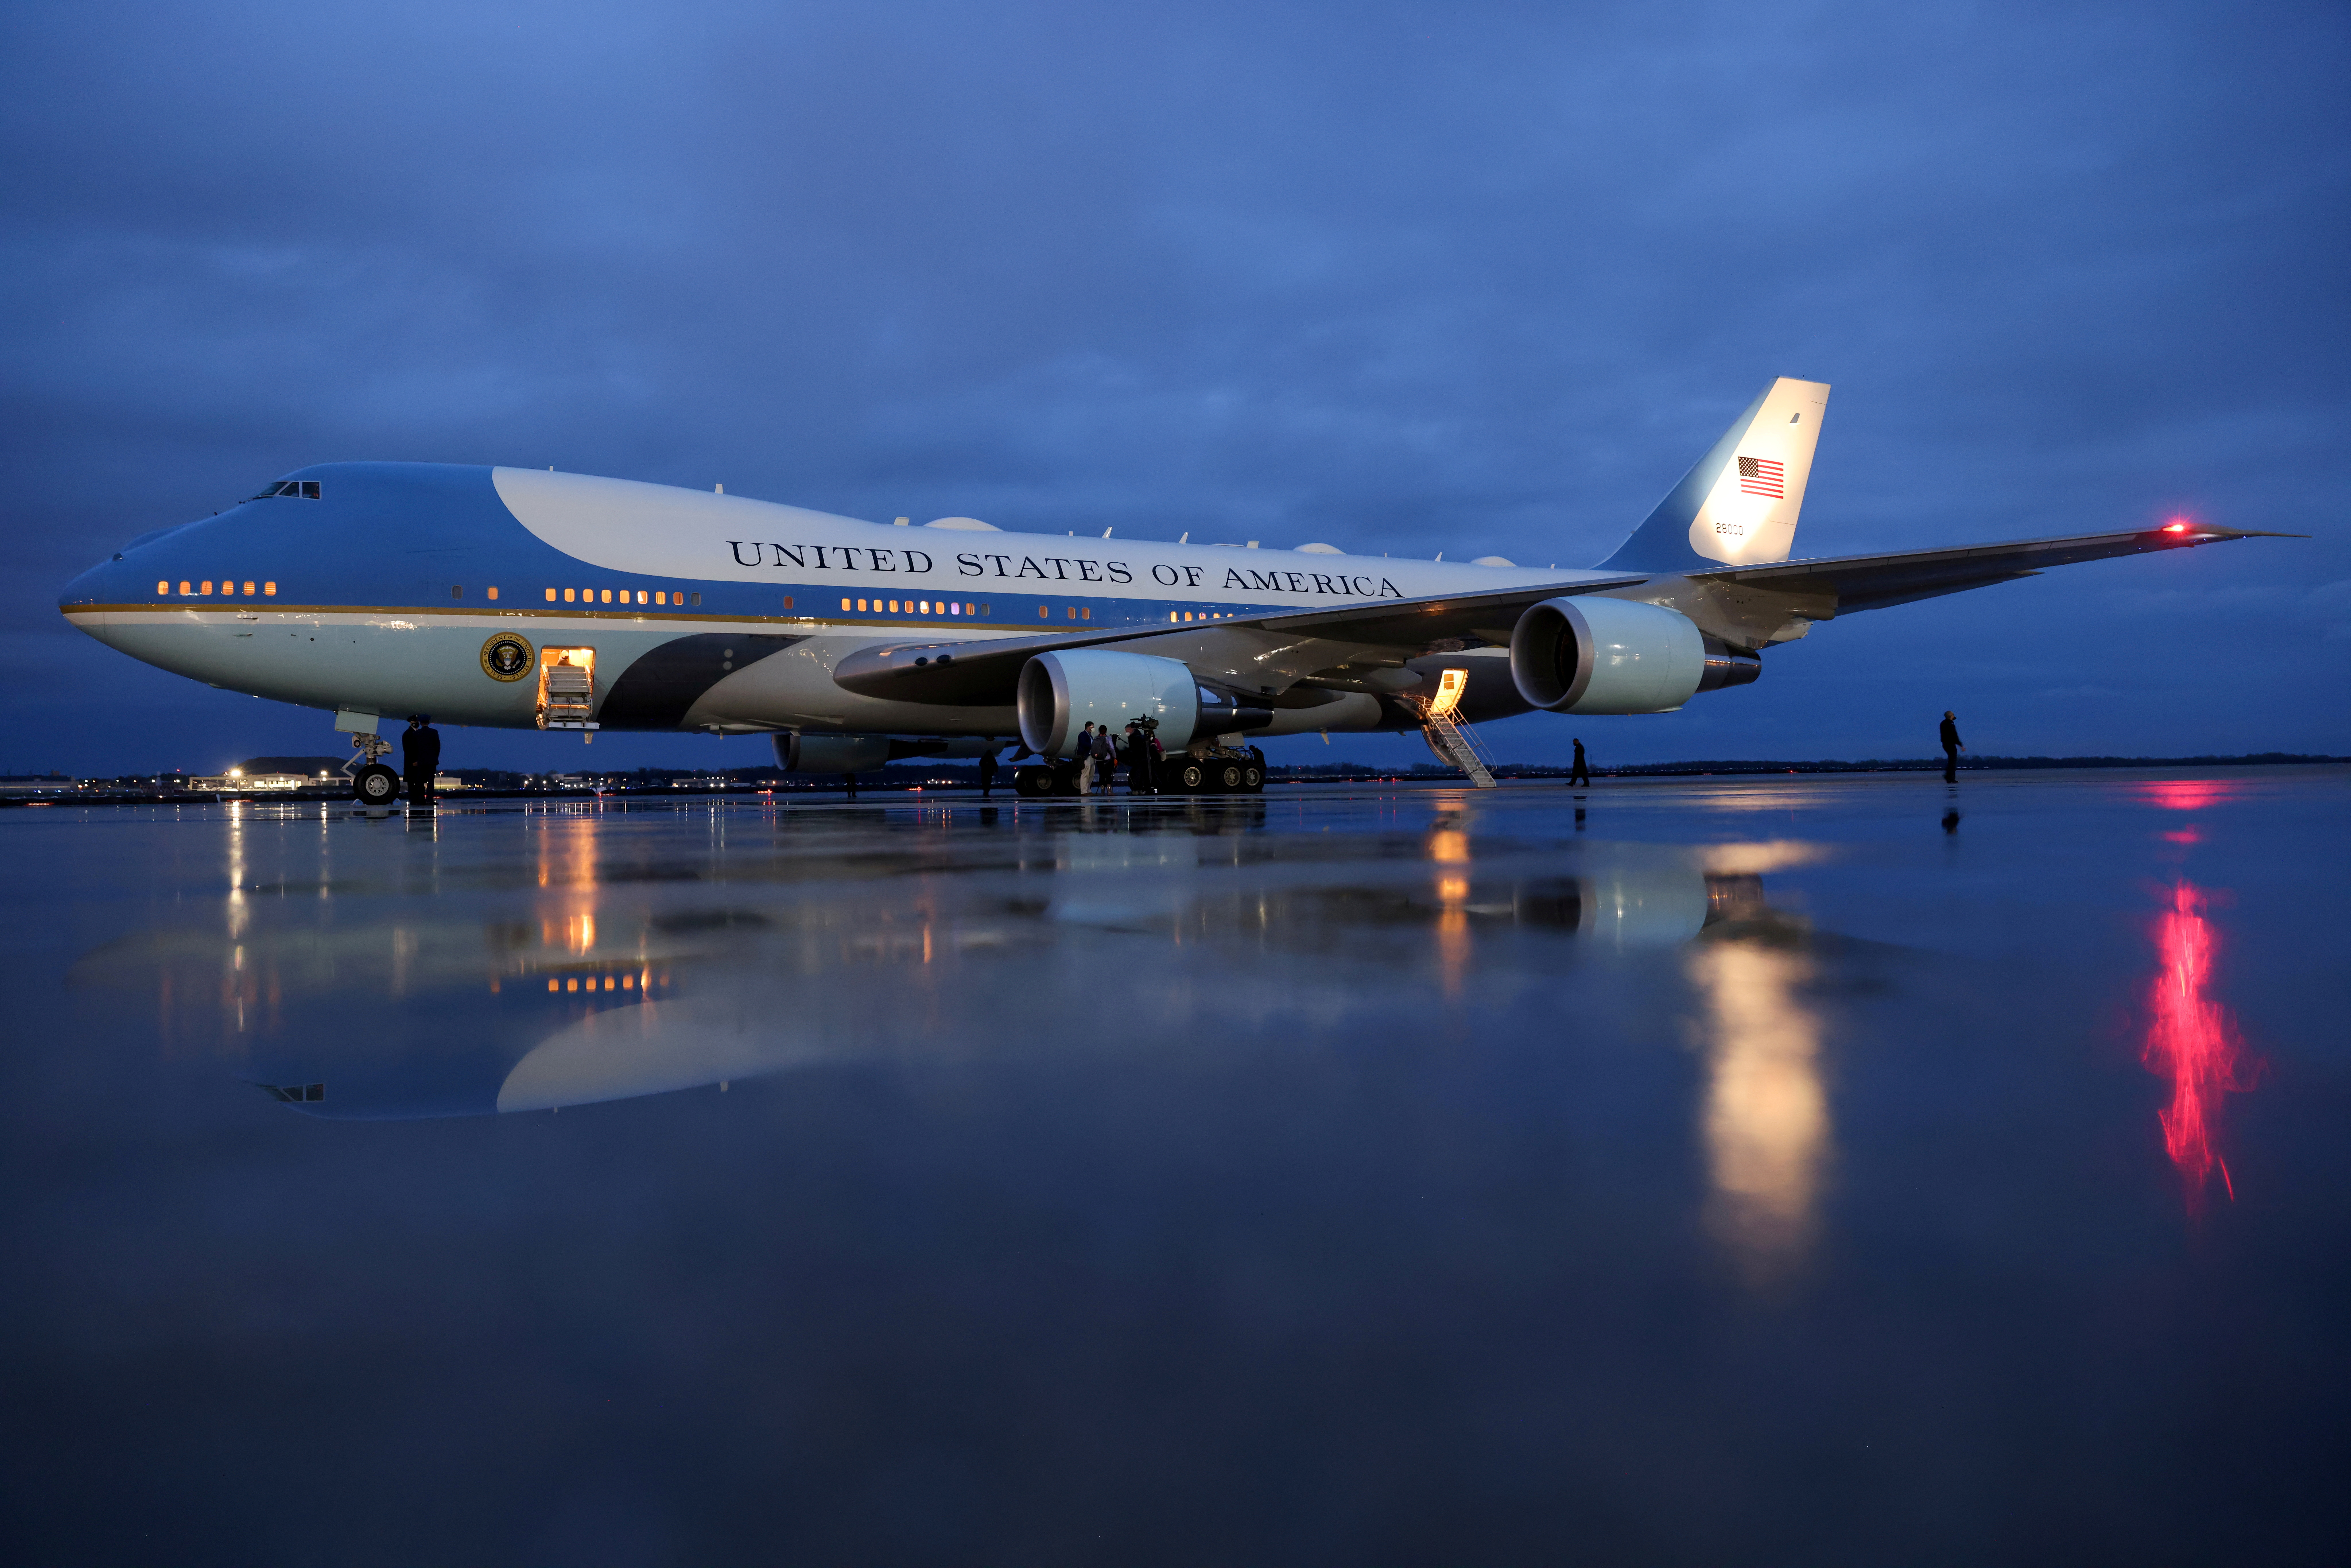 Boeing lifts price tag for Air Force One contract - USAF official